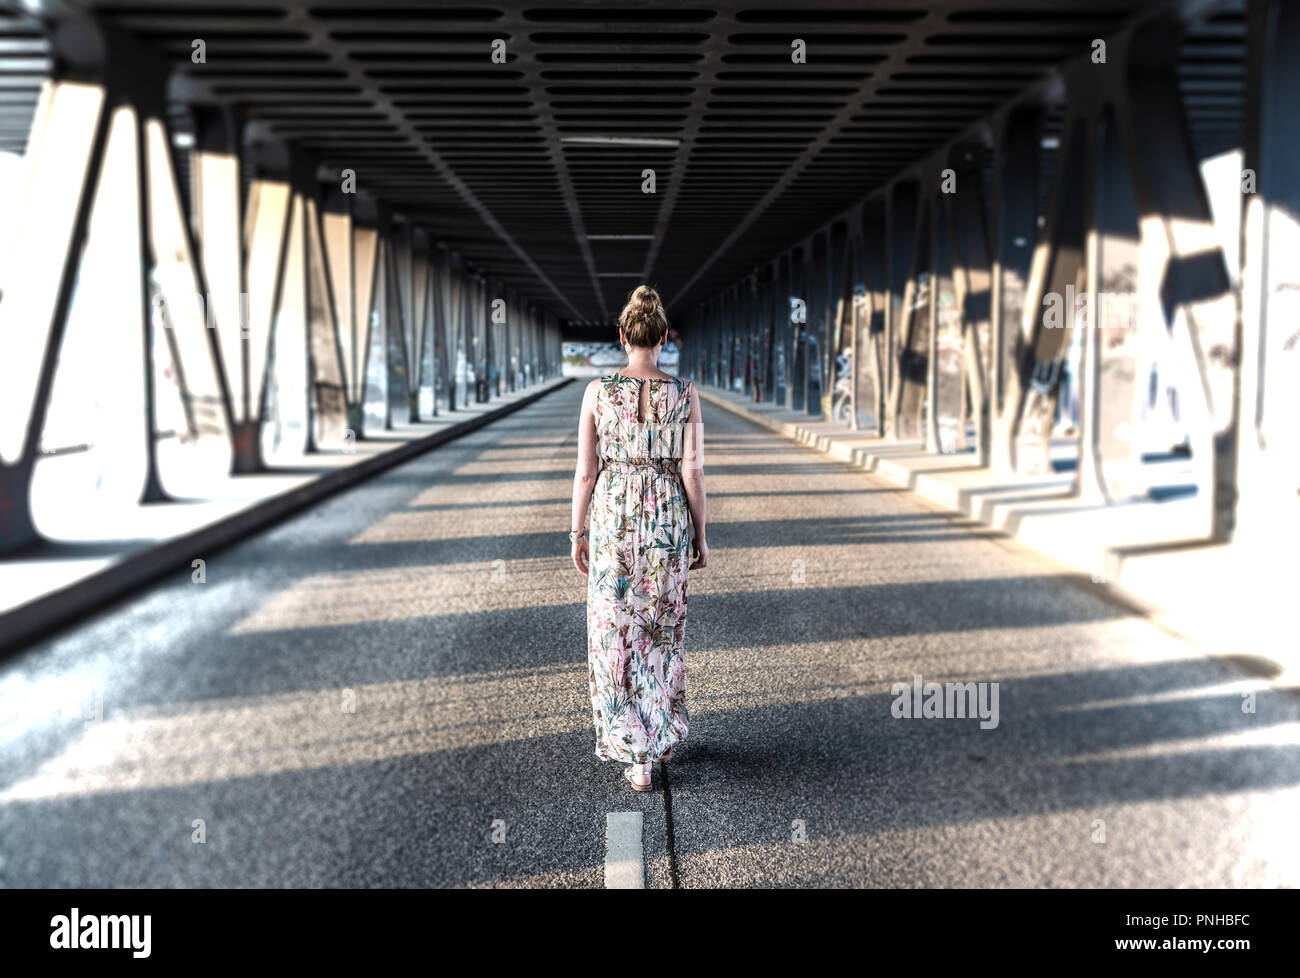 rear view of a woman in long dress walking in the middle of a road under bridge Stock Photo